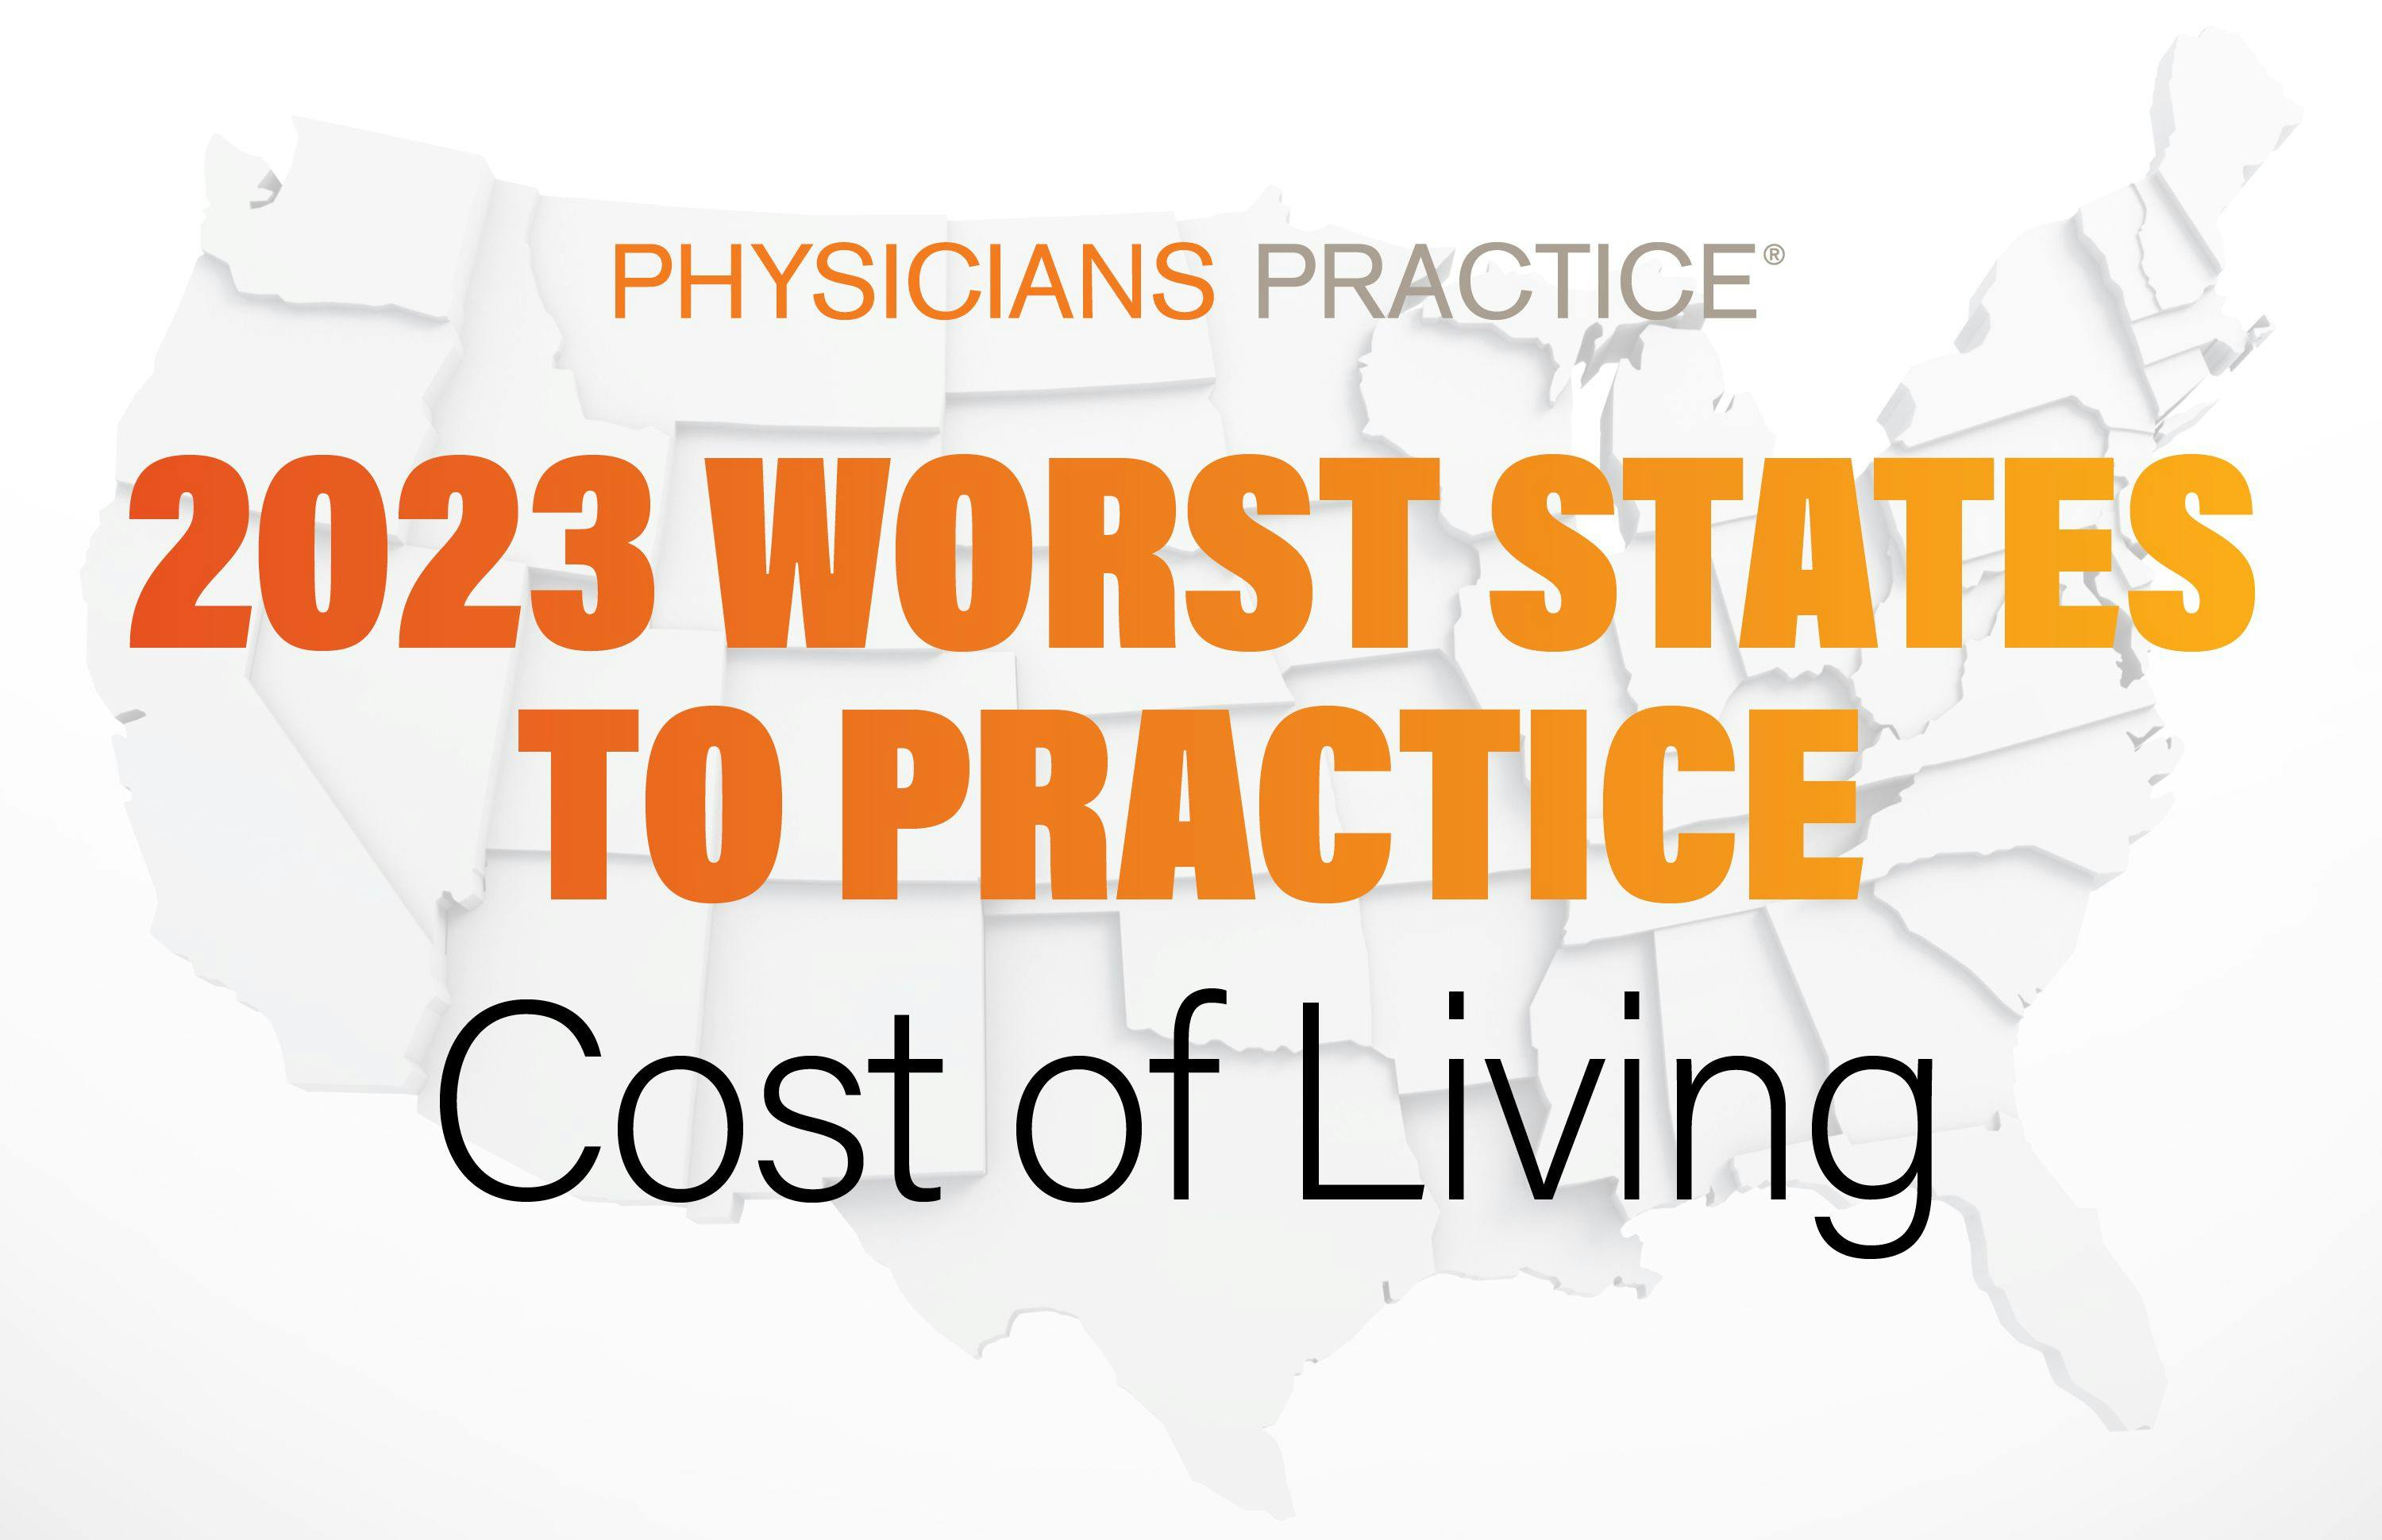 The 11 worst states for physician cost of living 2023